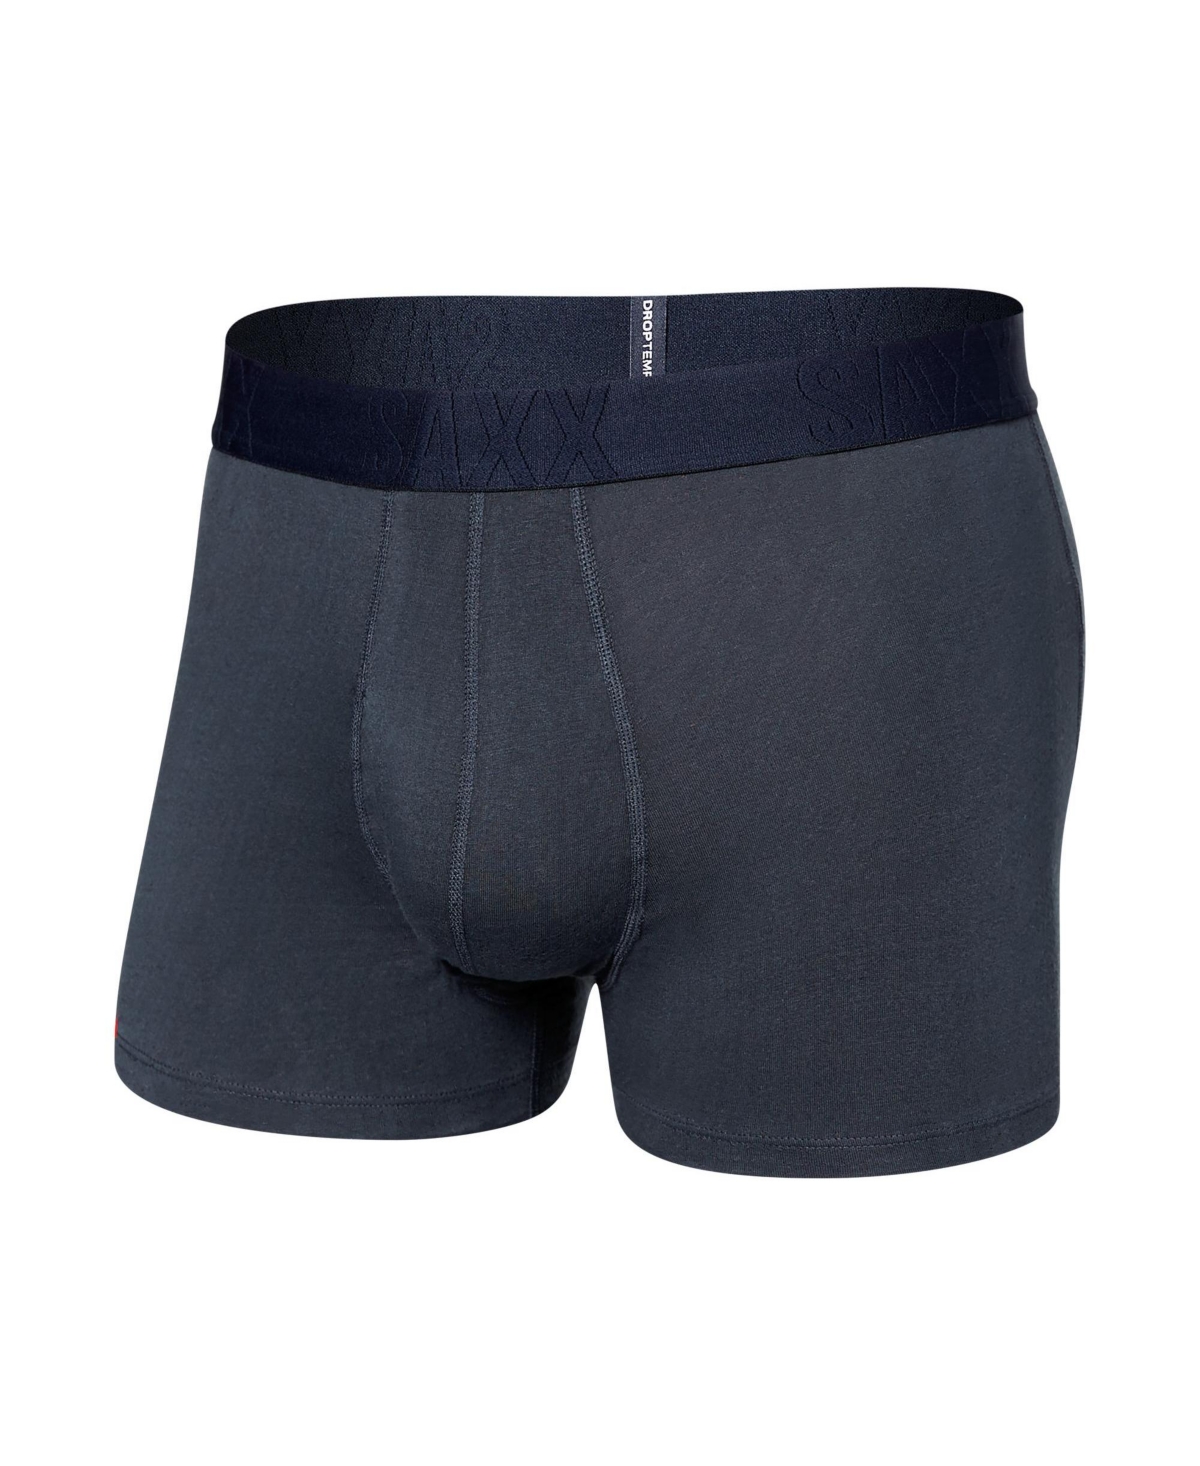 Saxx Men's Droptemp Cooling Cotton Fly Trunk In India Ink